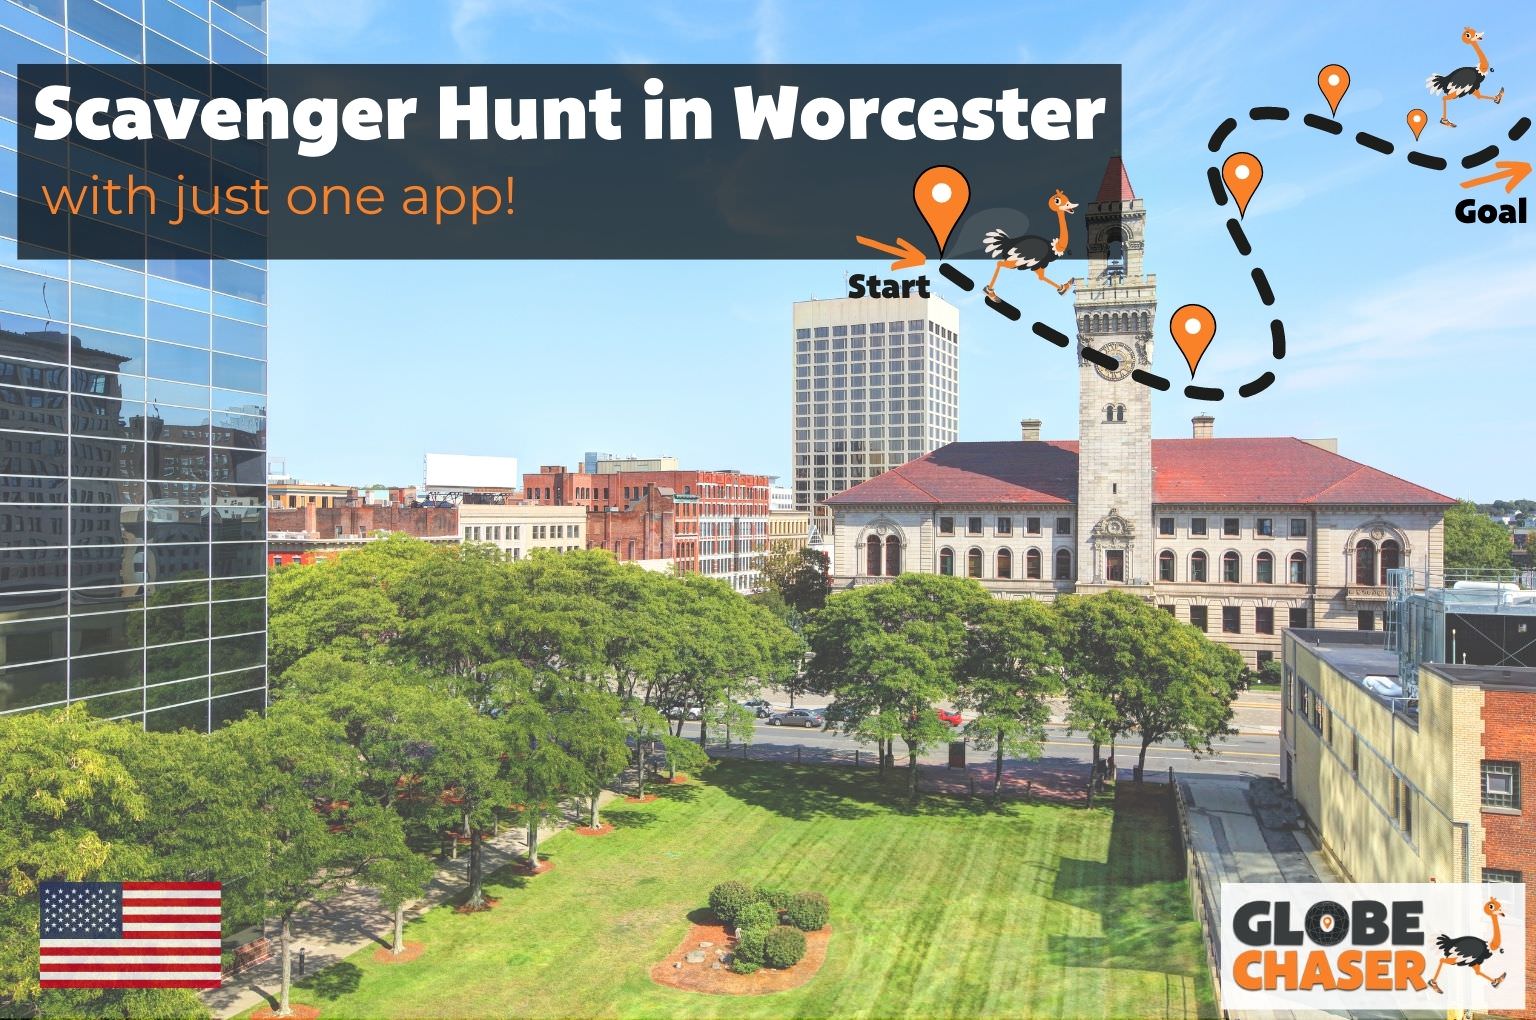 Scavenger Hunt in Worcester, USA - Family Activities with the Globe Chaser App for Outdoor Fun